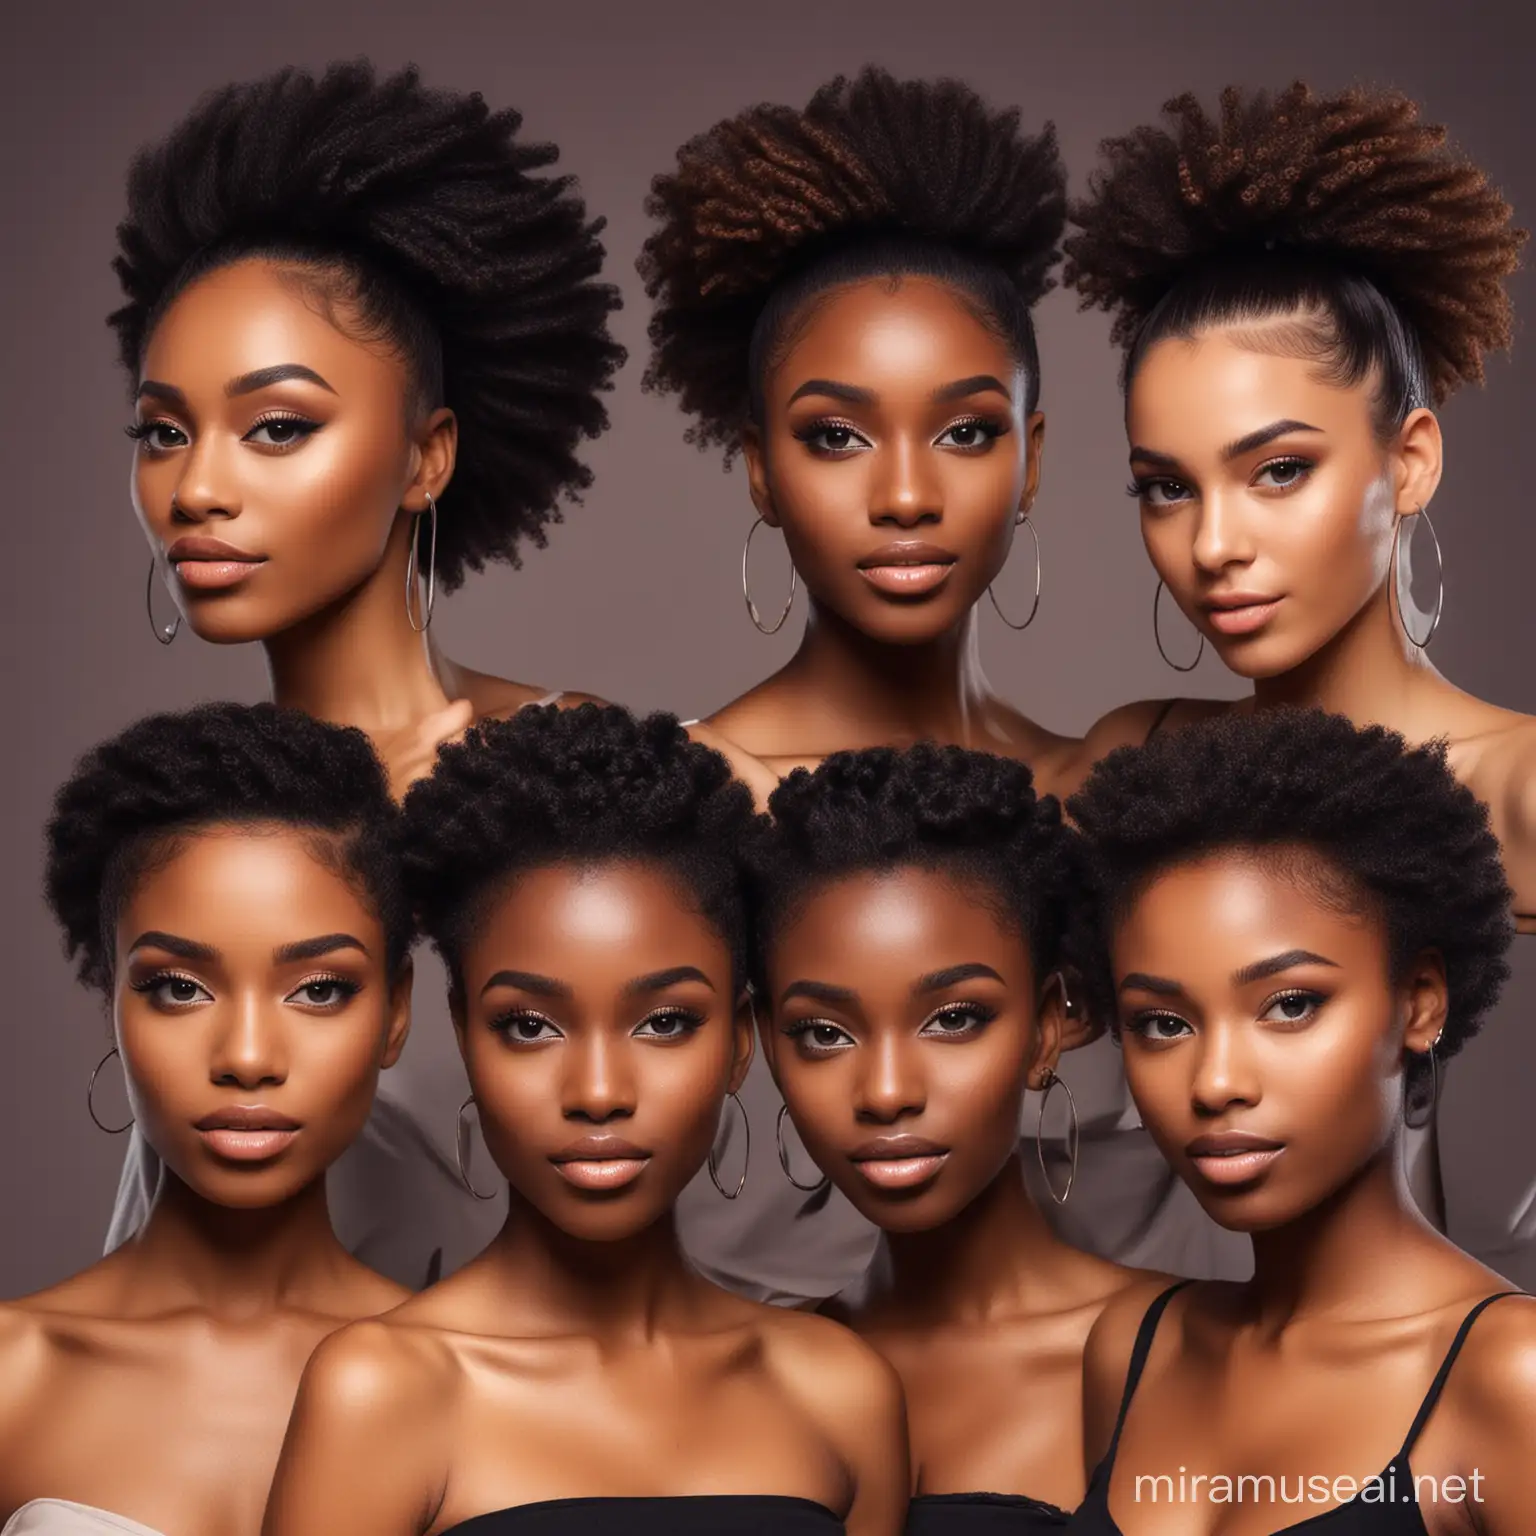 Group of dark skin girls, with different hairstyles, glowing skin, beautiful and stylish